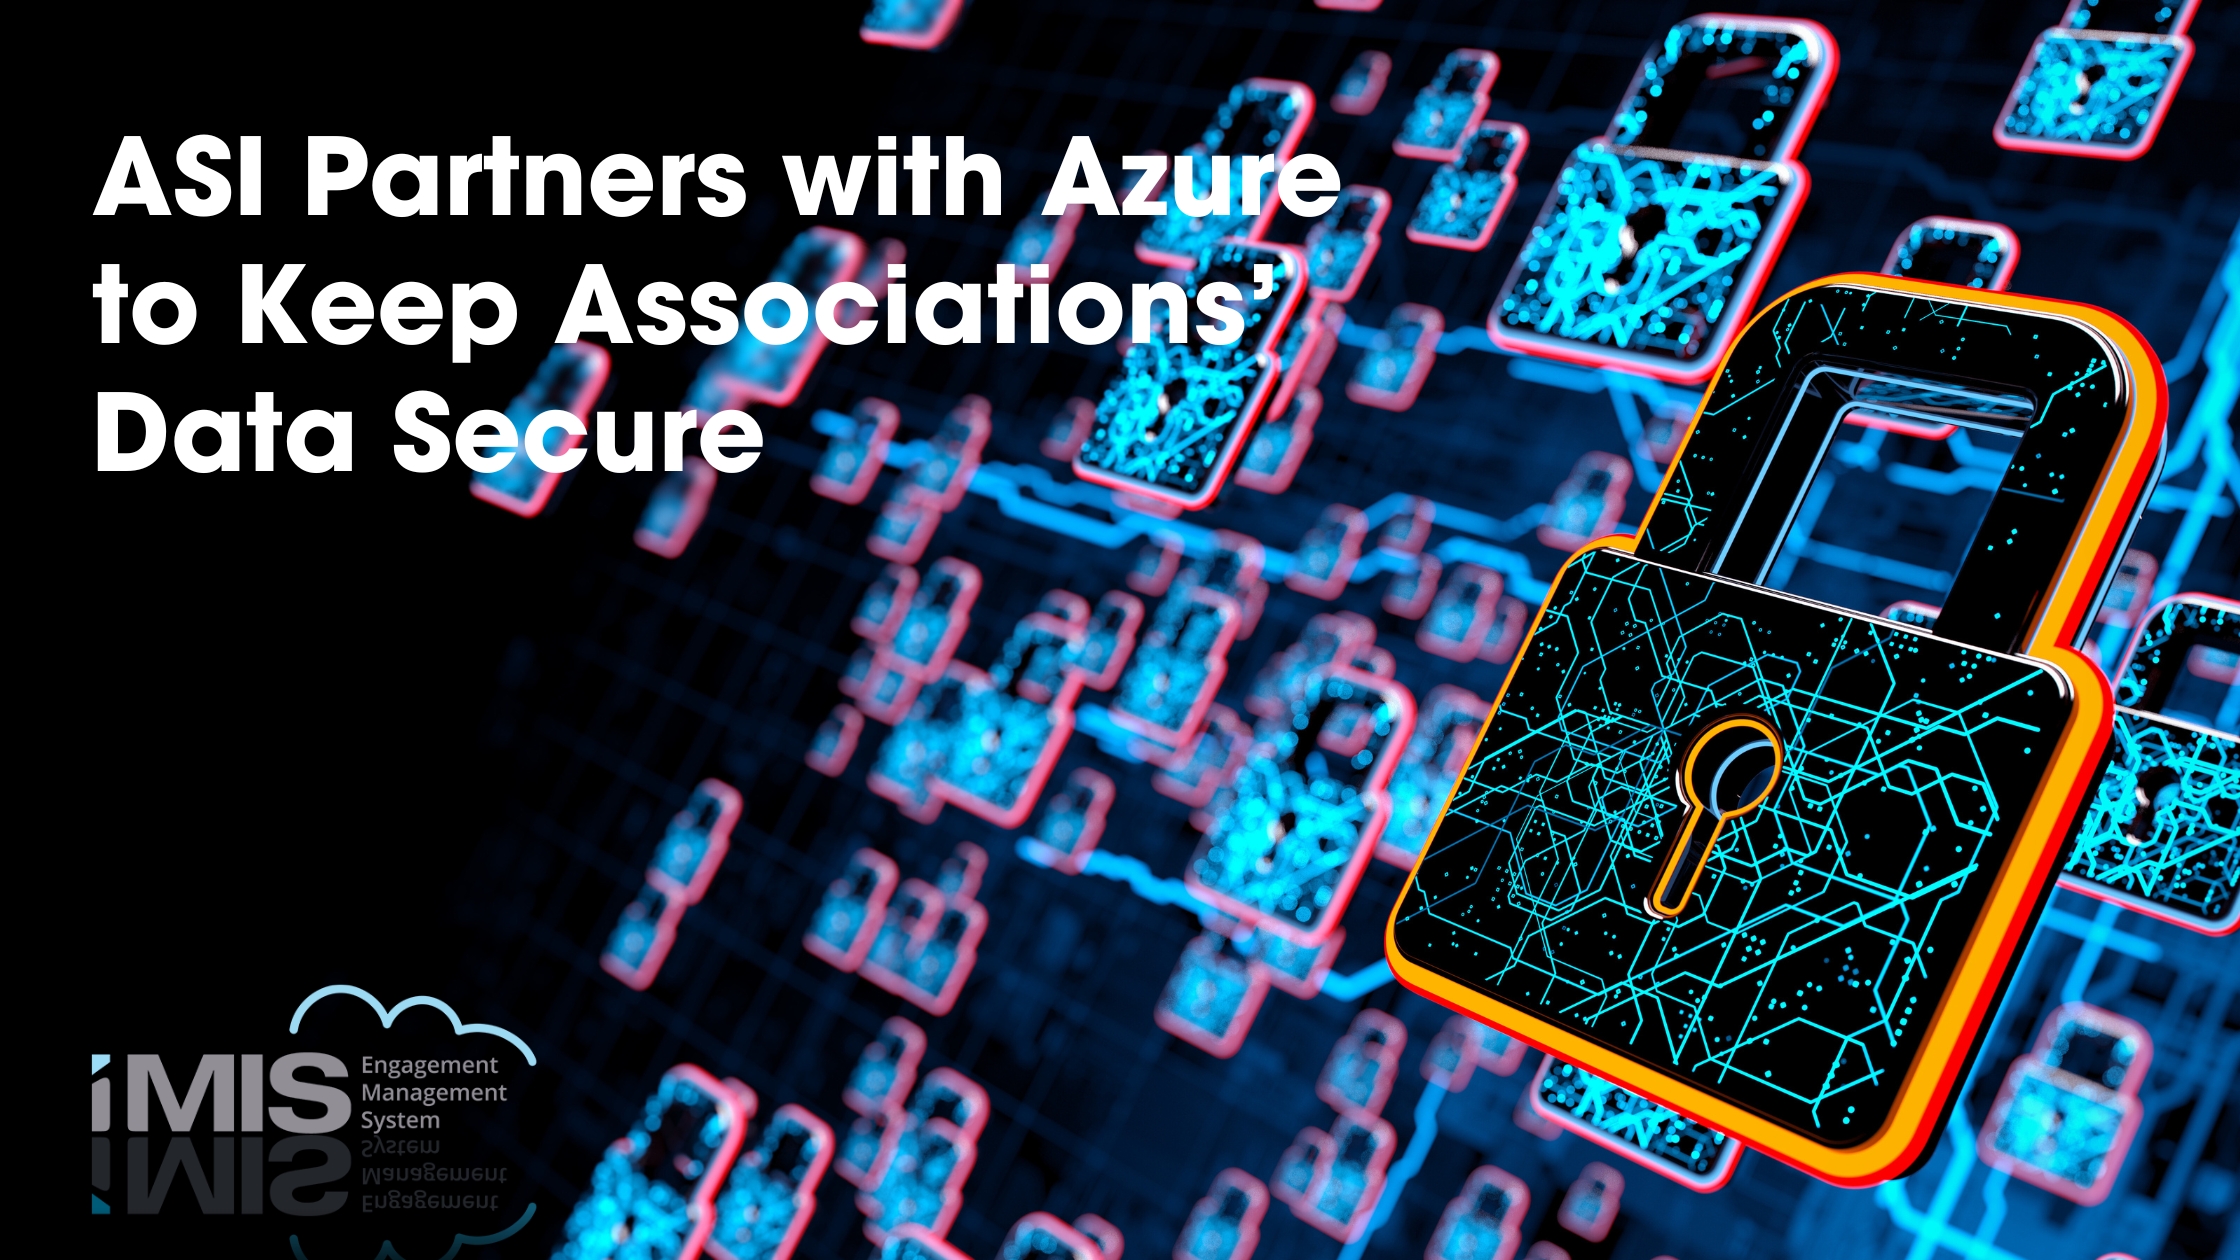 ASI Partners with Azure to Keep Associations’ Data Secure